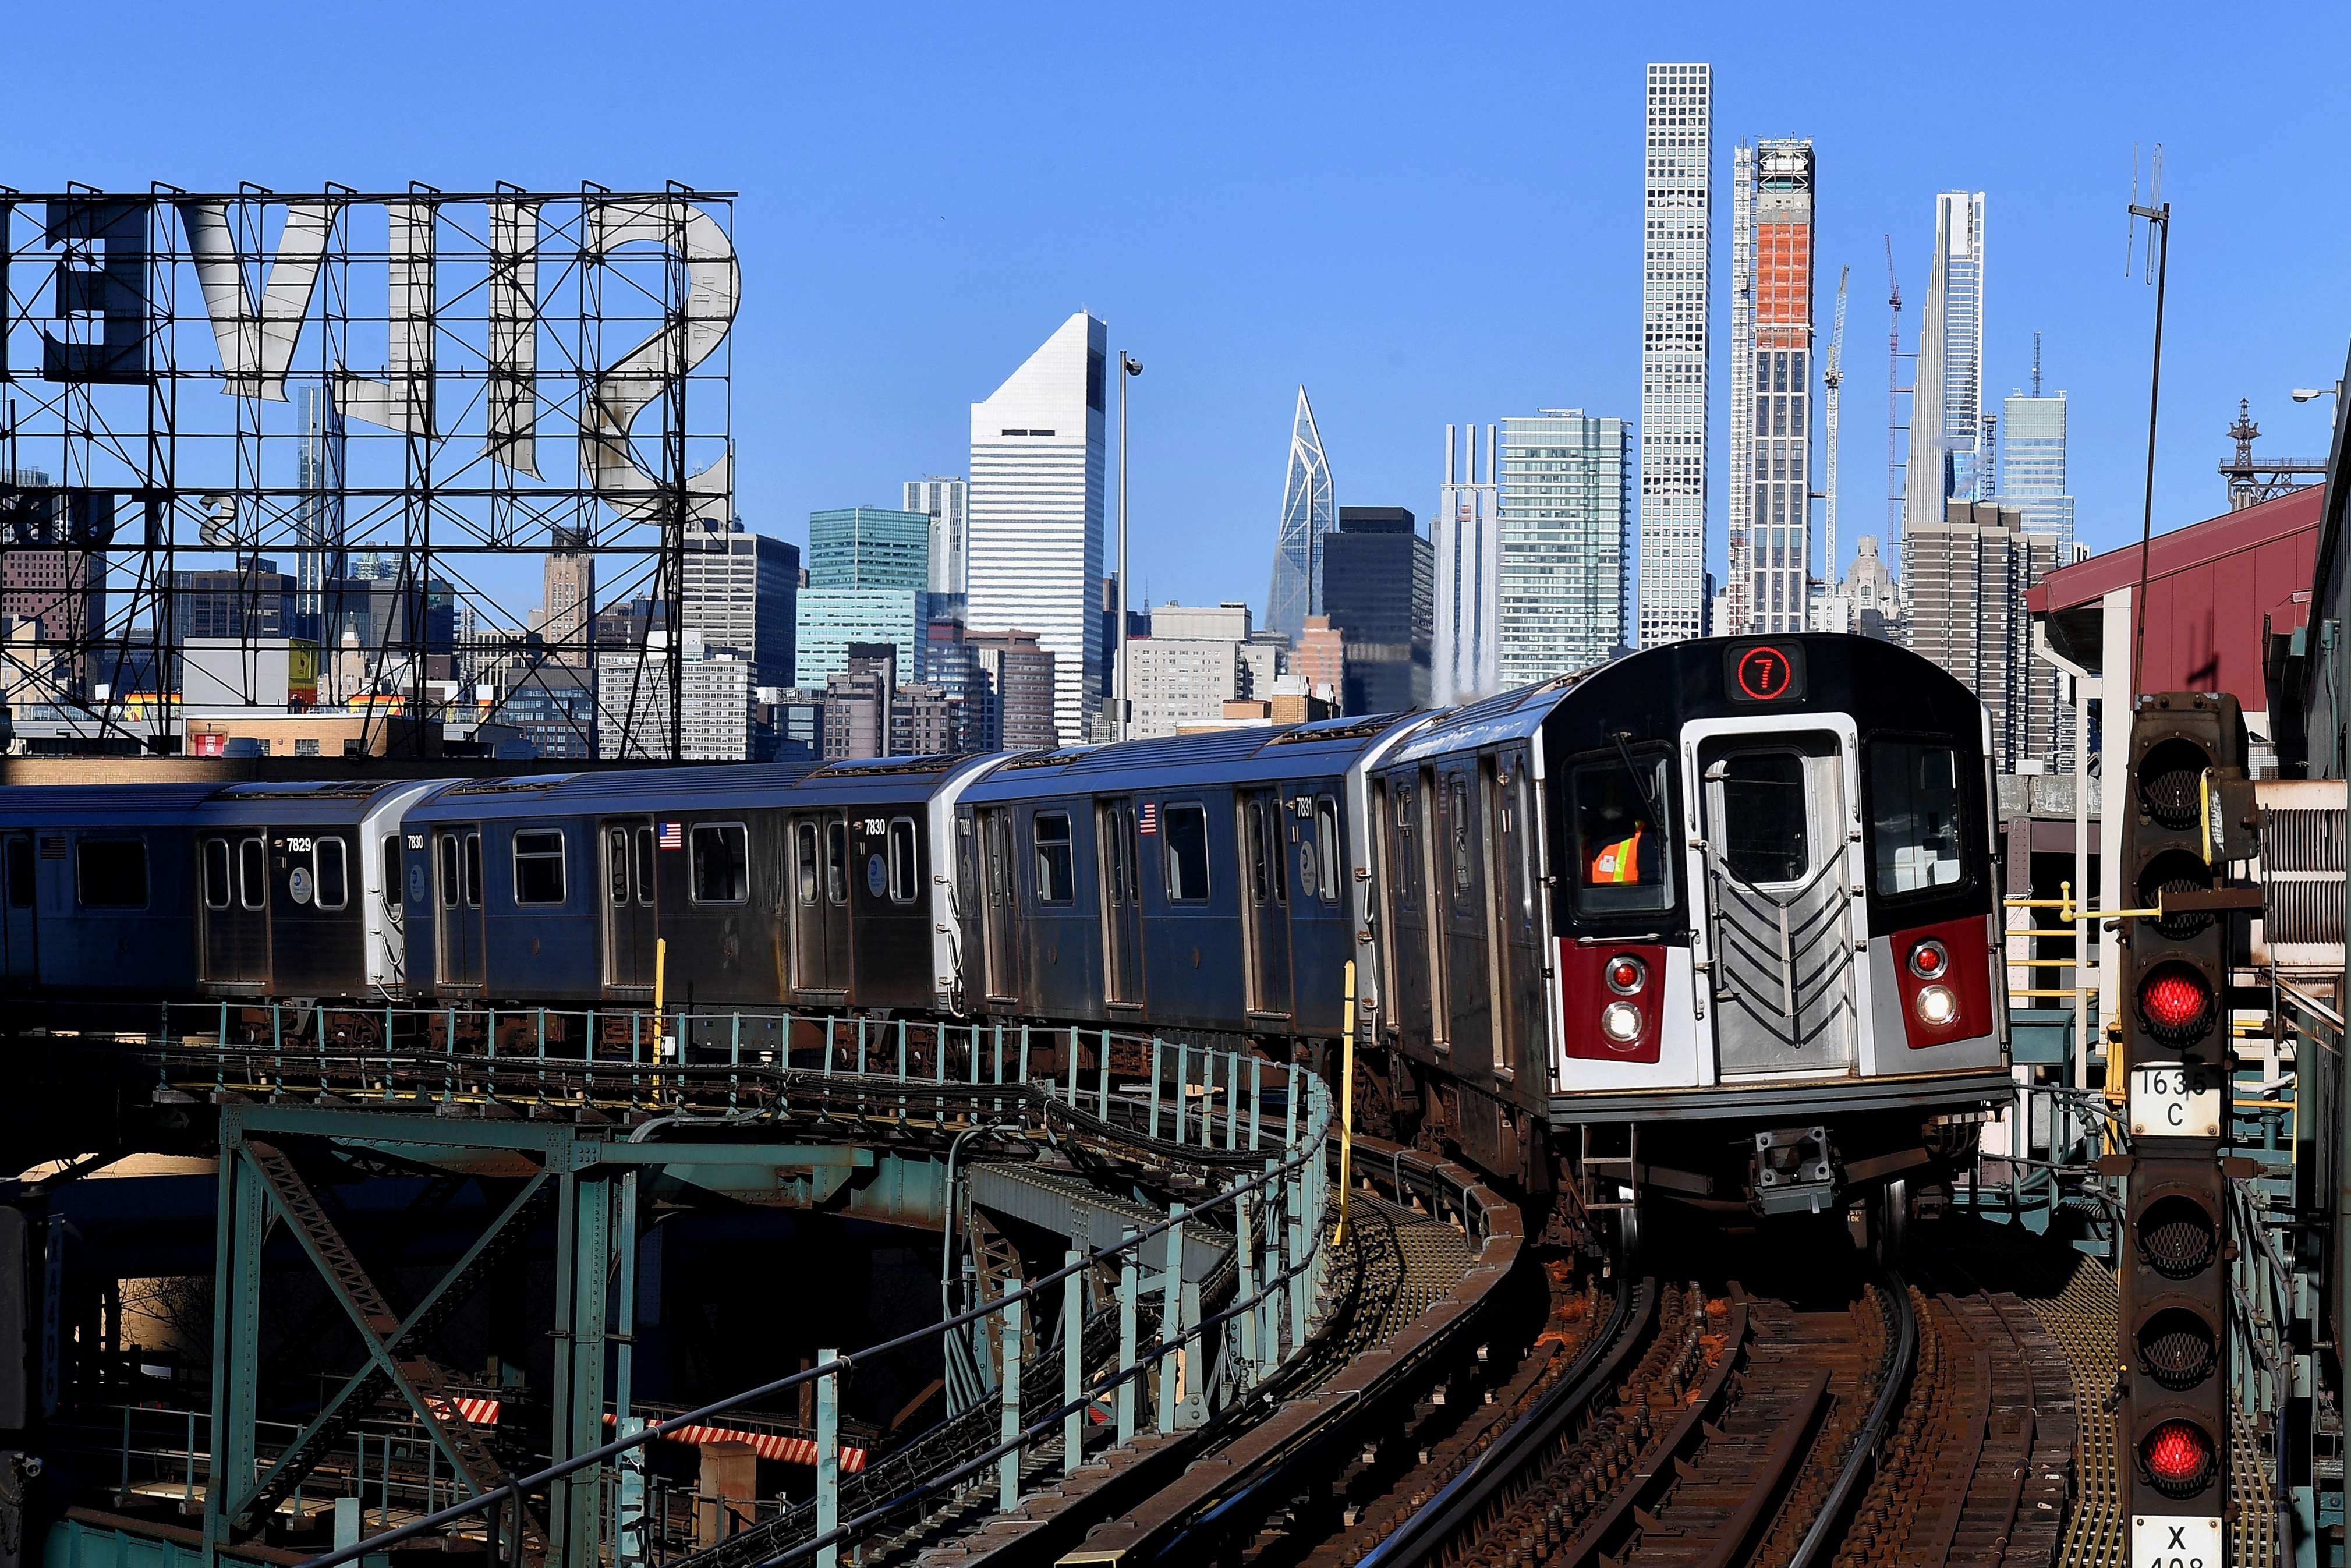 New York’s subway is one of the busiest metro systems in the world